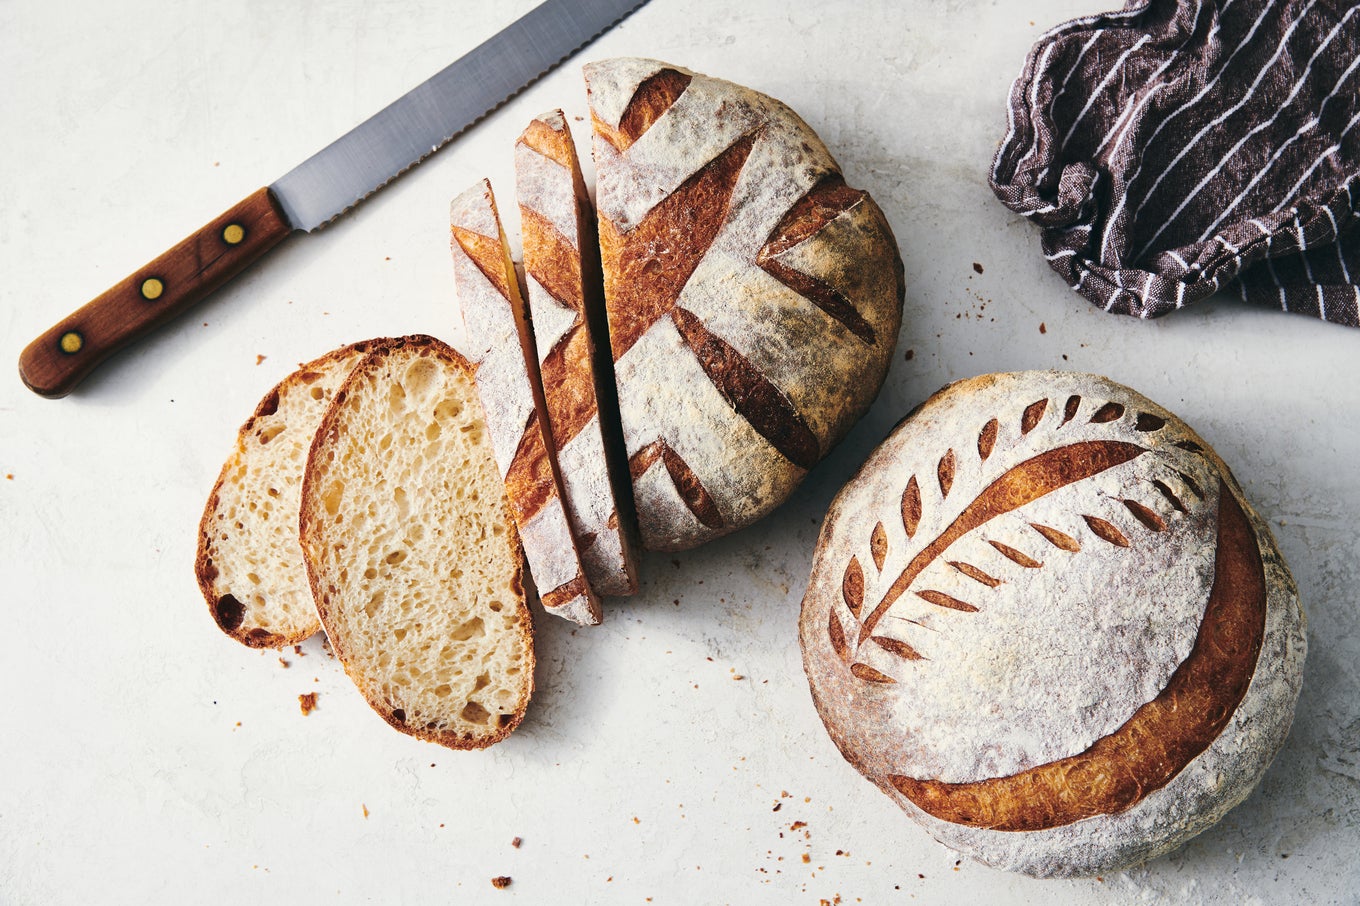 The First-time Bread Baker: A beginner's guide to baking bread at home